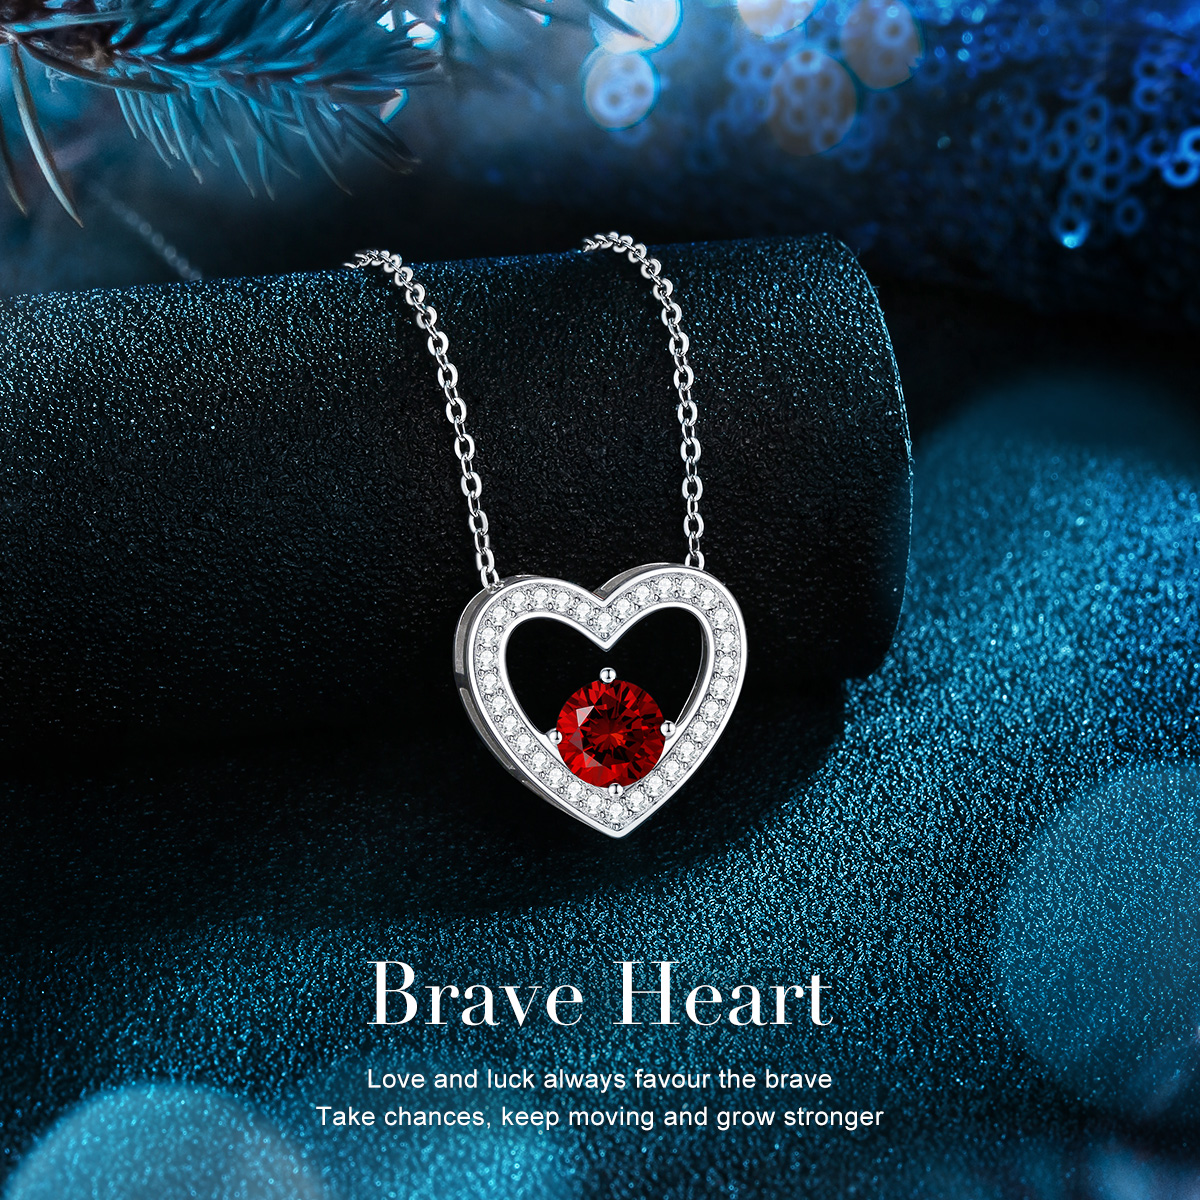 CDE Brave Heart 925 Silver Necklaces with Birthstone for Women Girls Mom Wife Girlfriend, Pendant Necklace Jewelry Gifts for Christmas Birthday Anniversary Valentine's Day - image 7 of 7